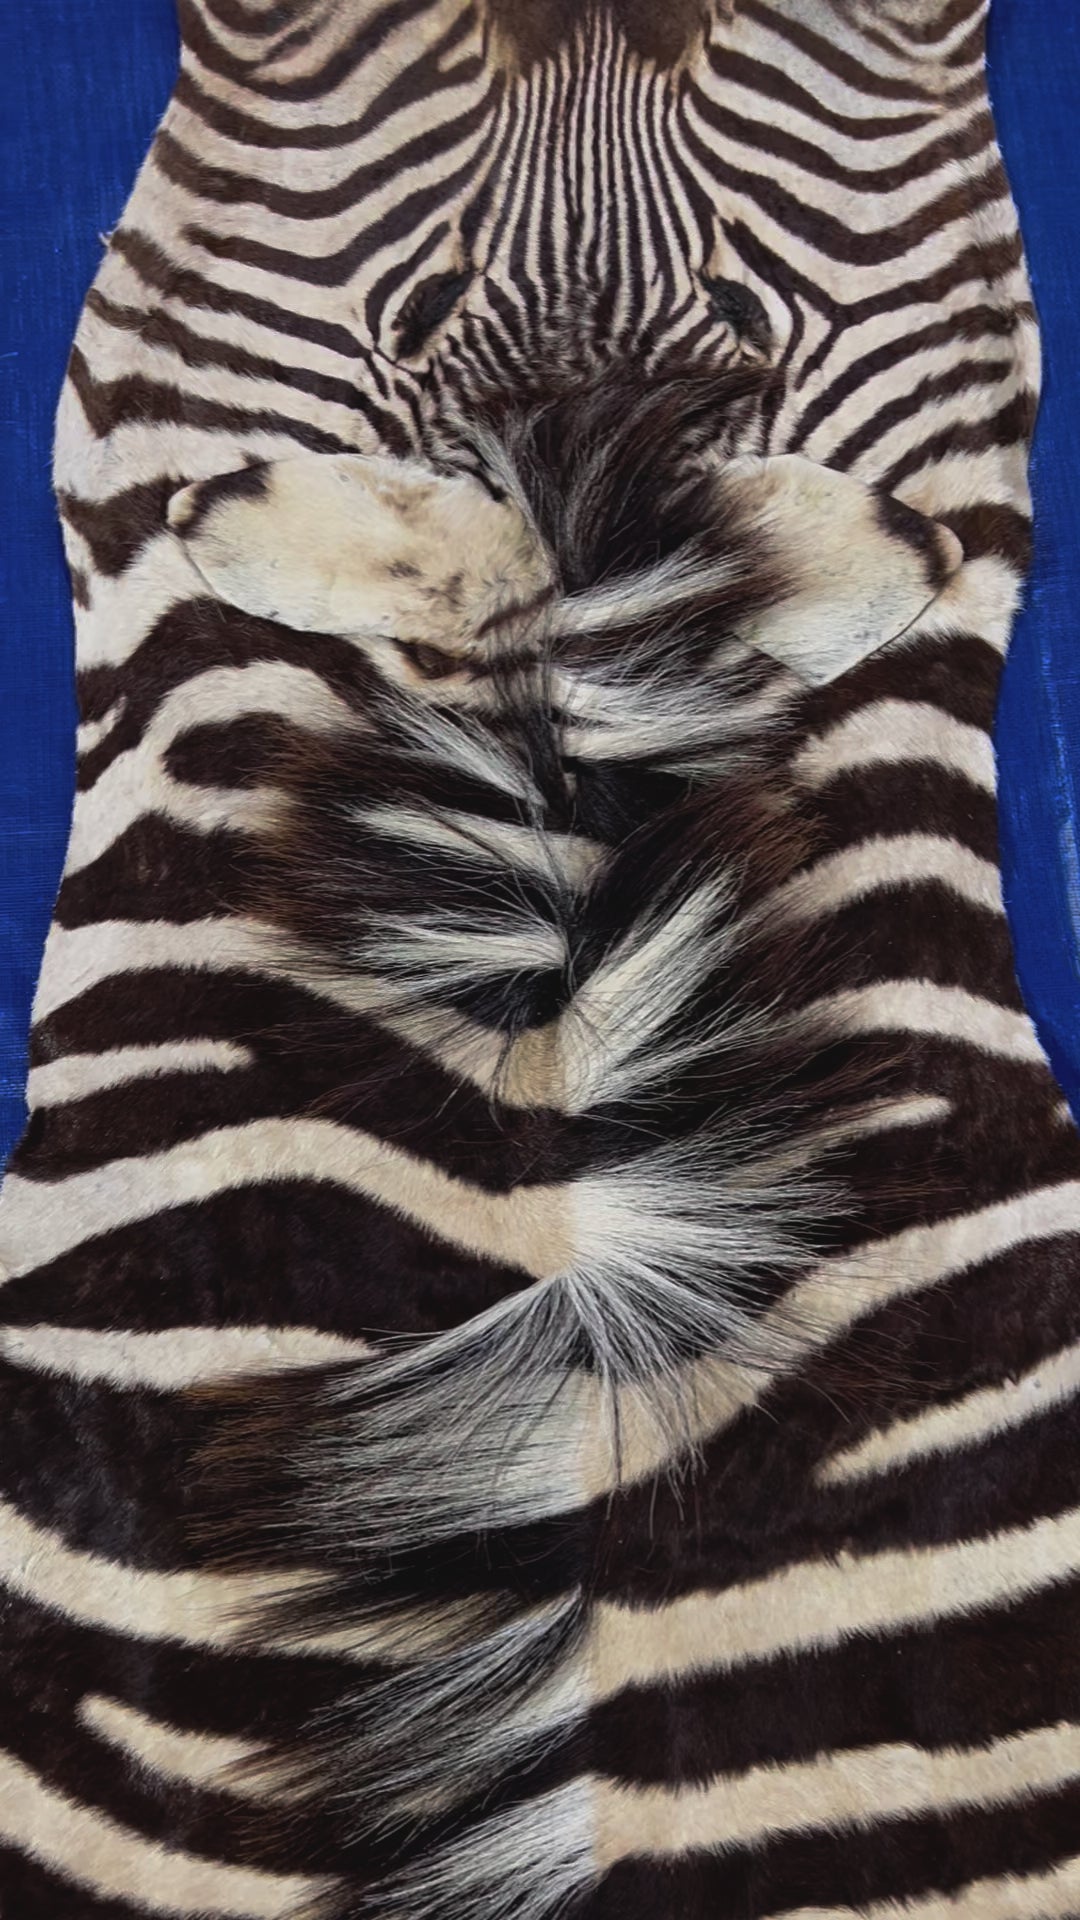 Real Zebra Skin Rug Size: 7.5x5.5 ft (Tail is about 25"/Across belly 50") # 1